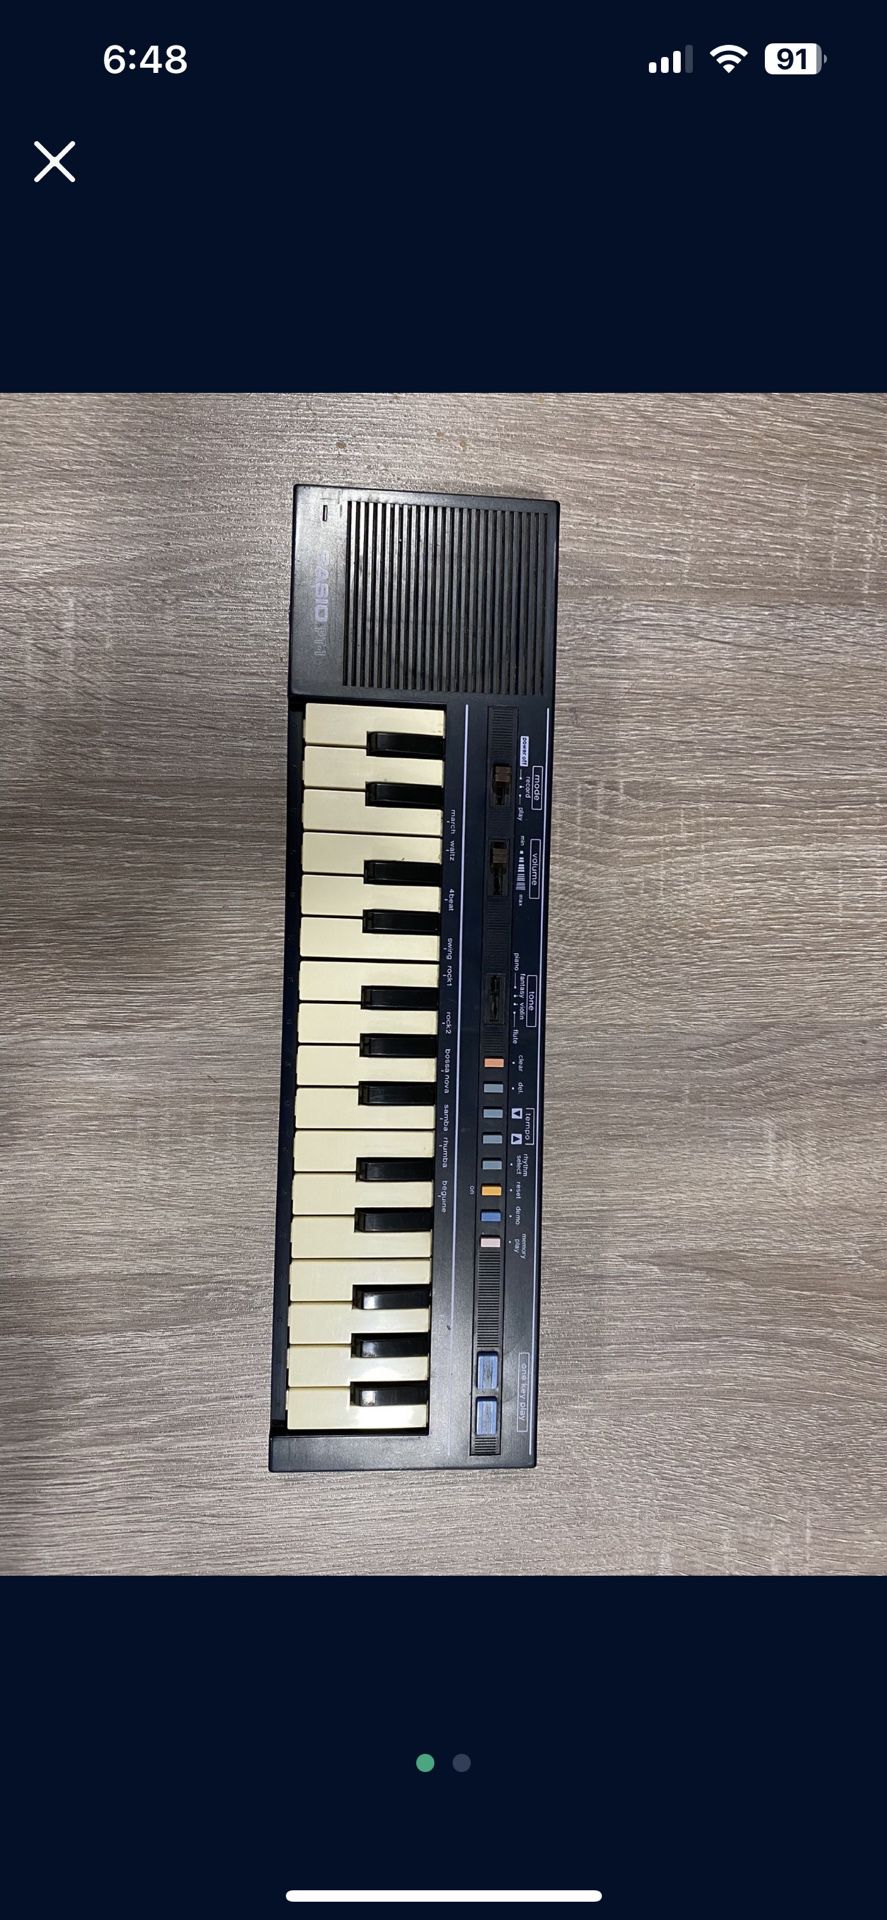 Casio (Mini Portable Keyboard Synthesizer) PT-1 Vintage Tested